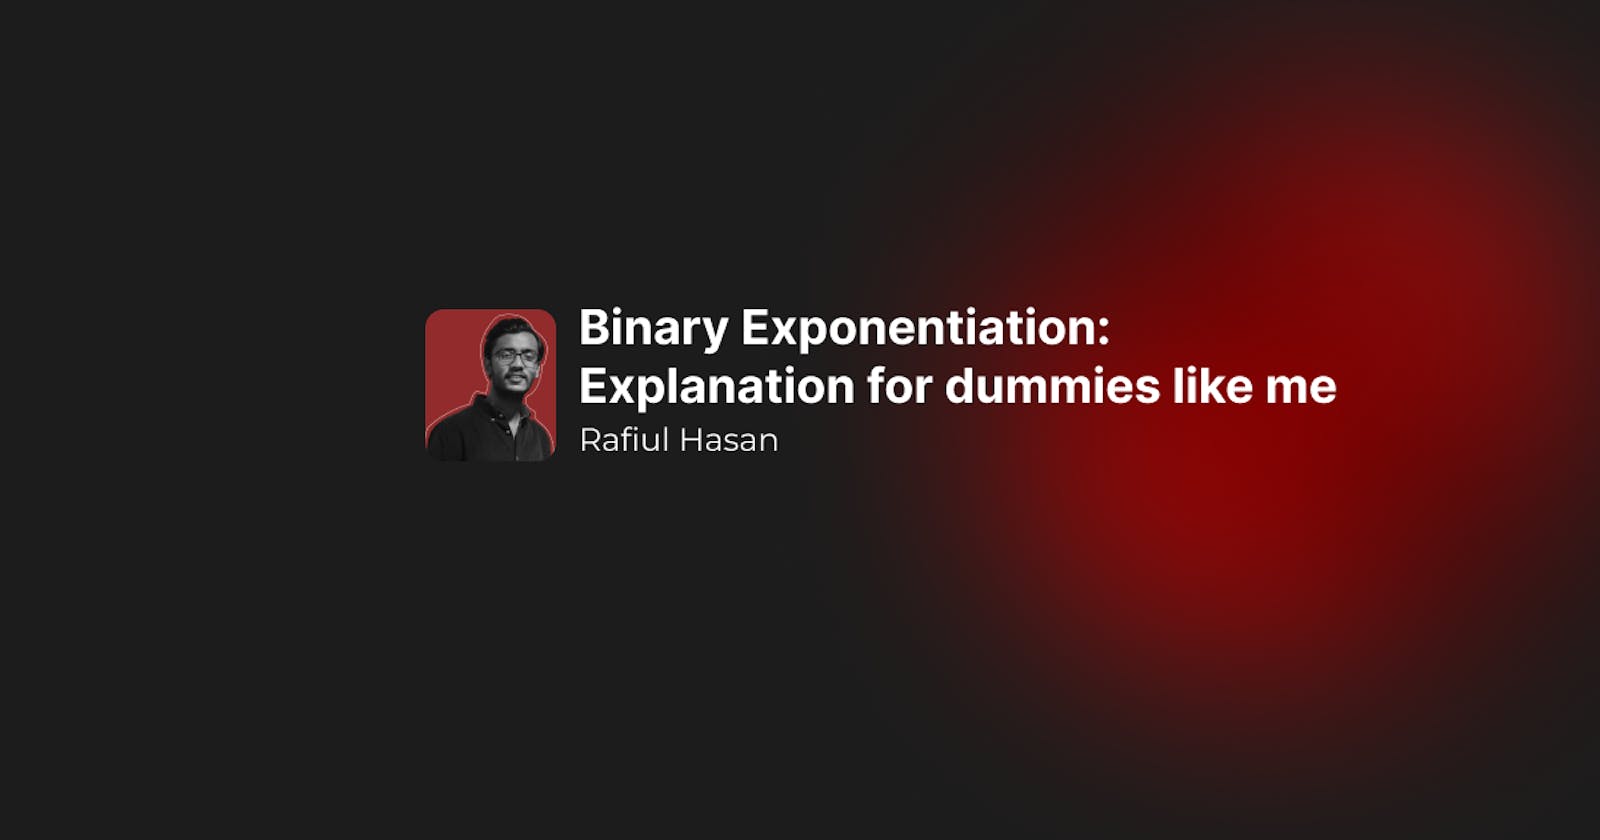 Binary Exponentiation: Explanation for dummies like me